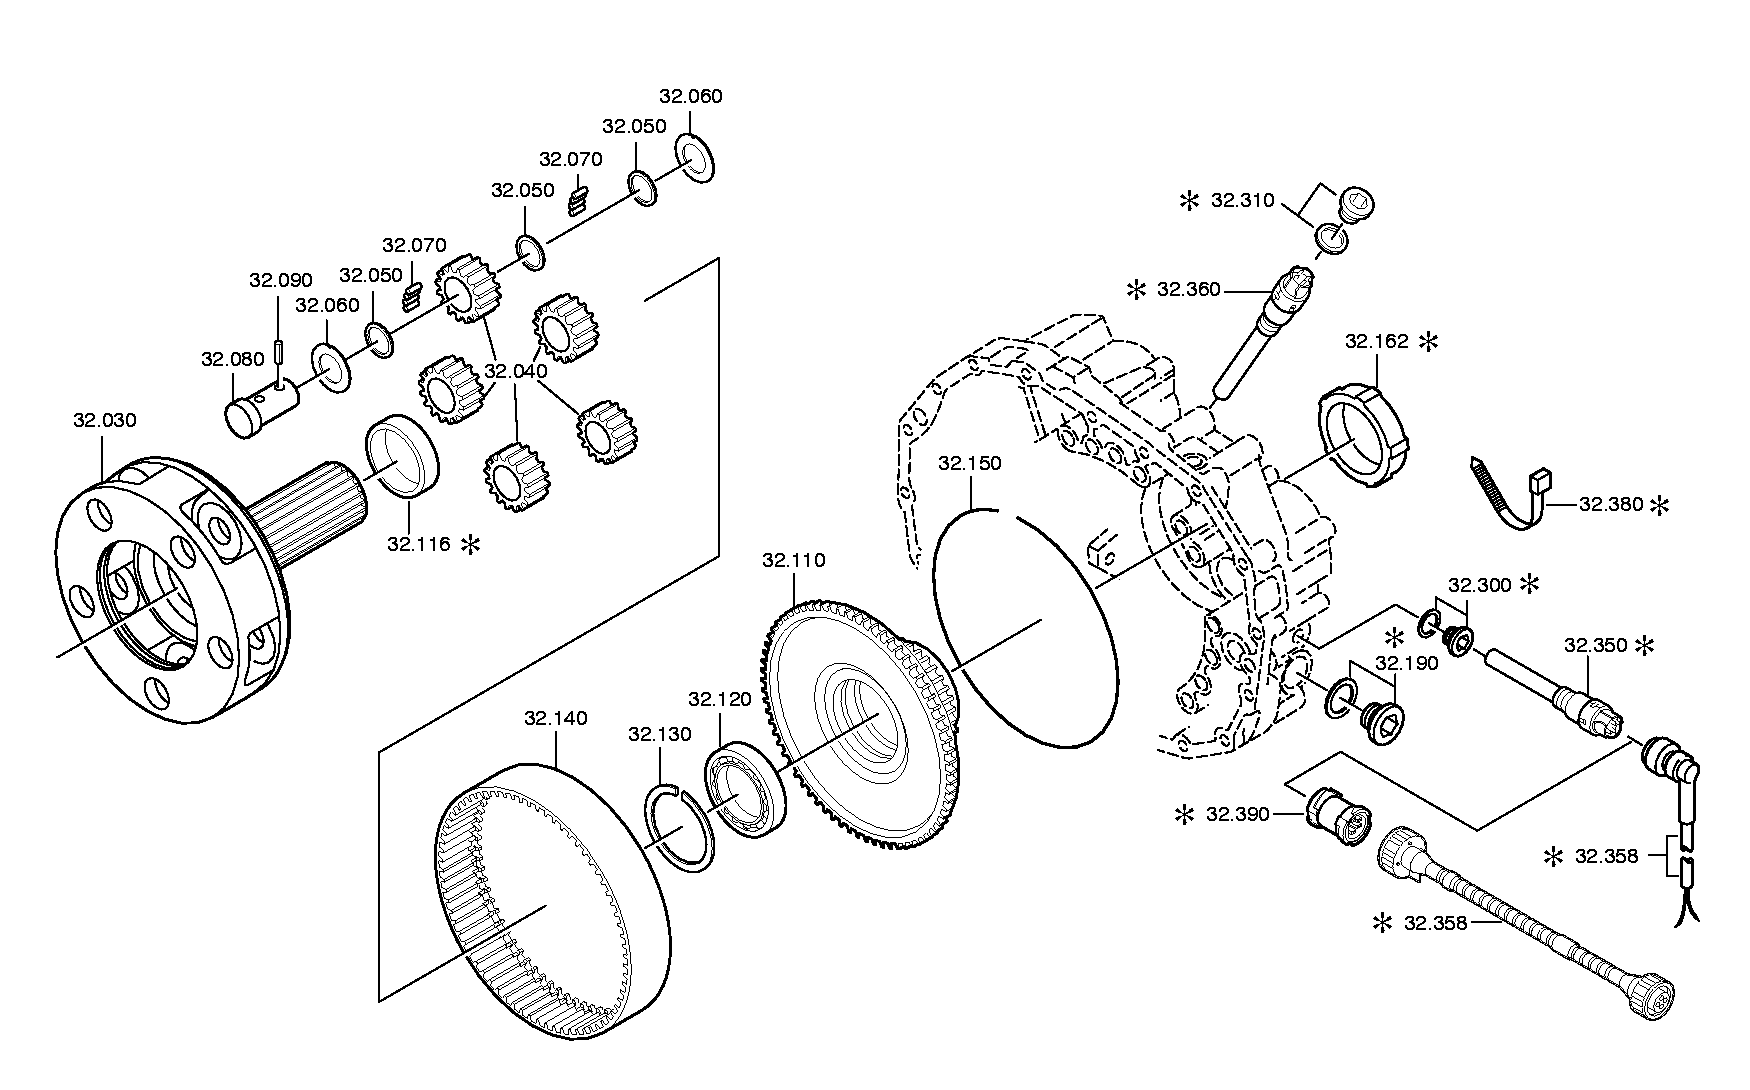 drawing for ALVIS VICKERS LTD. 1905286 - BALL BEARING (figure 2)